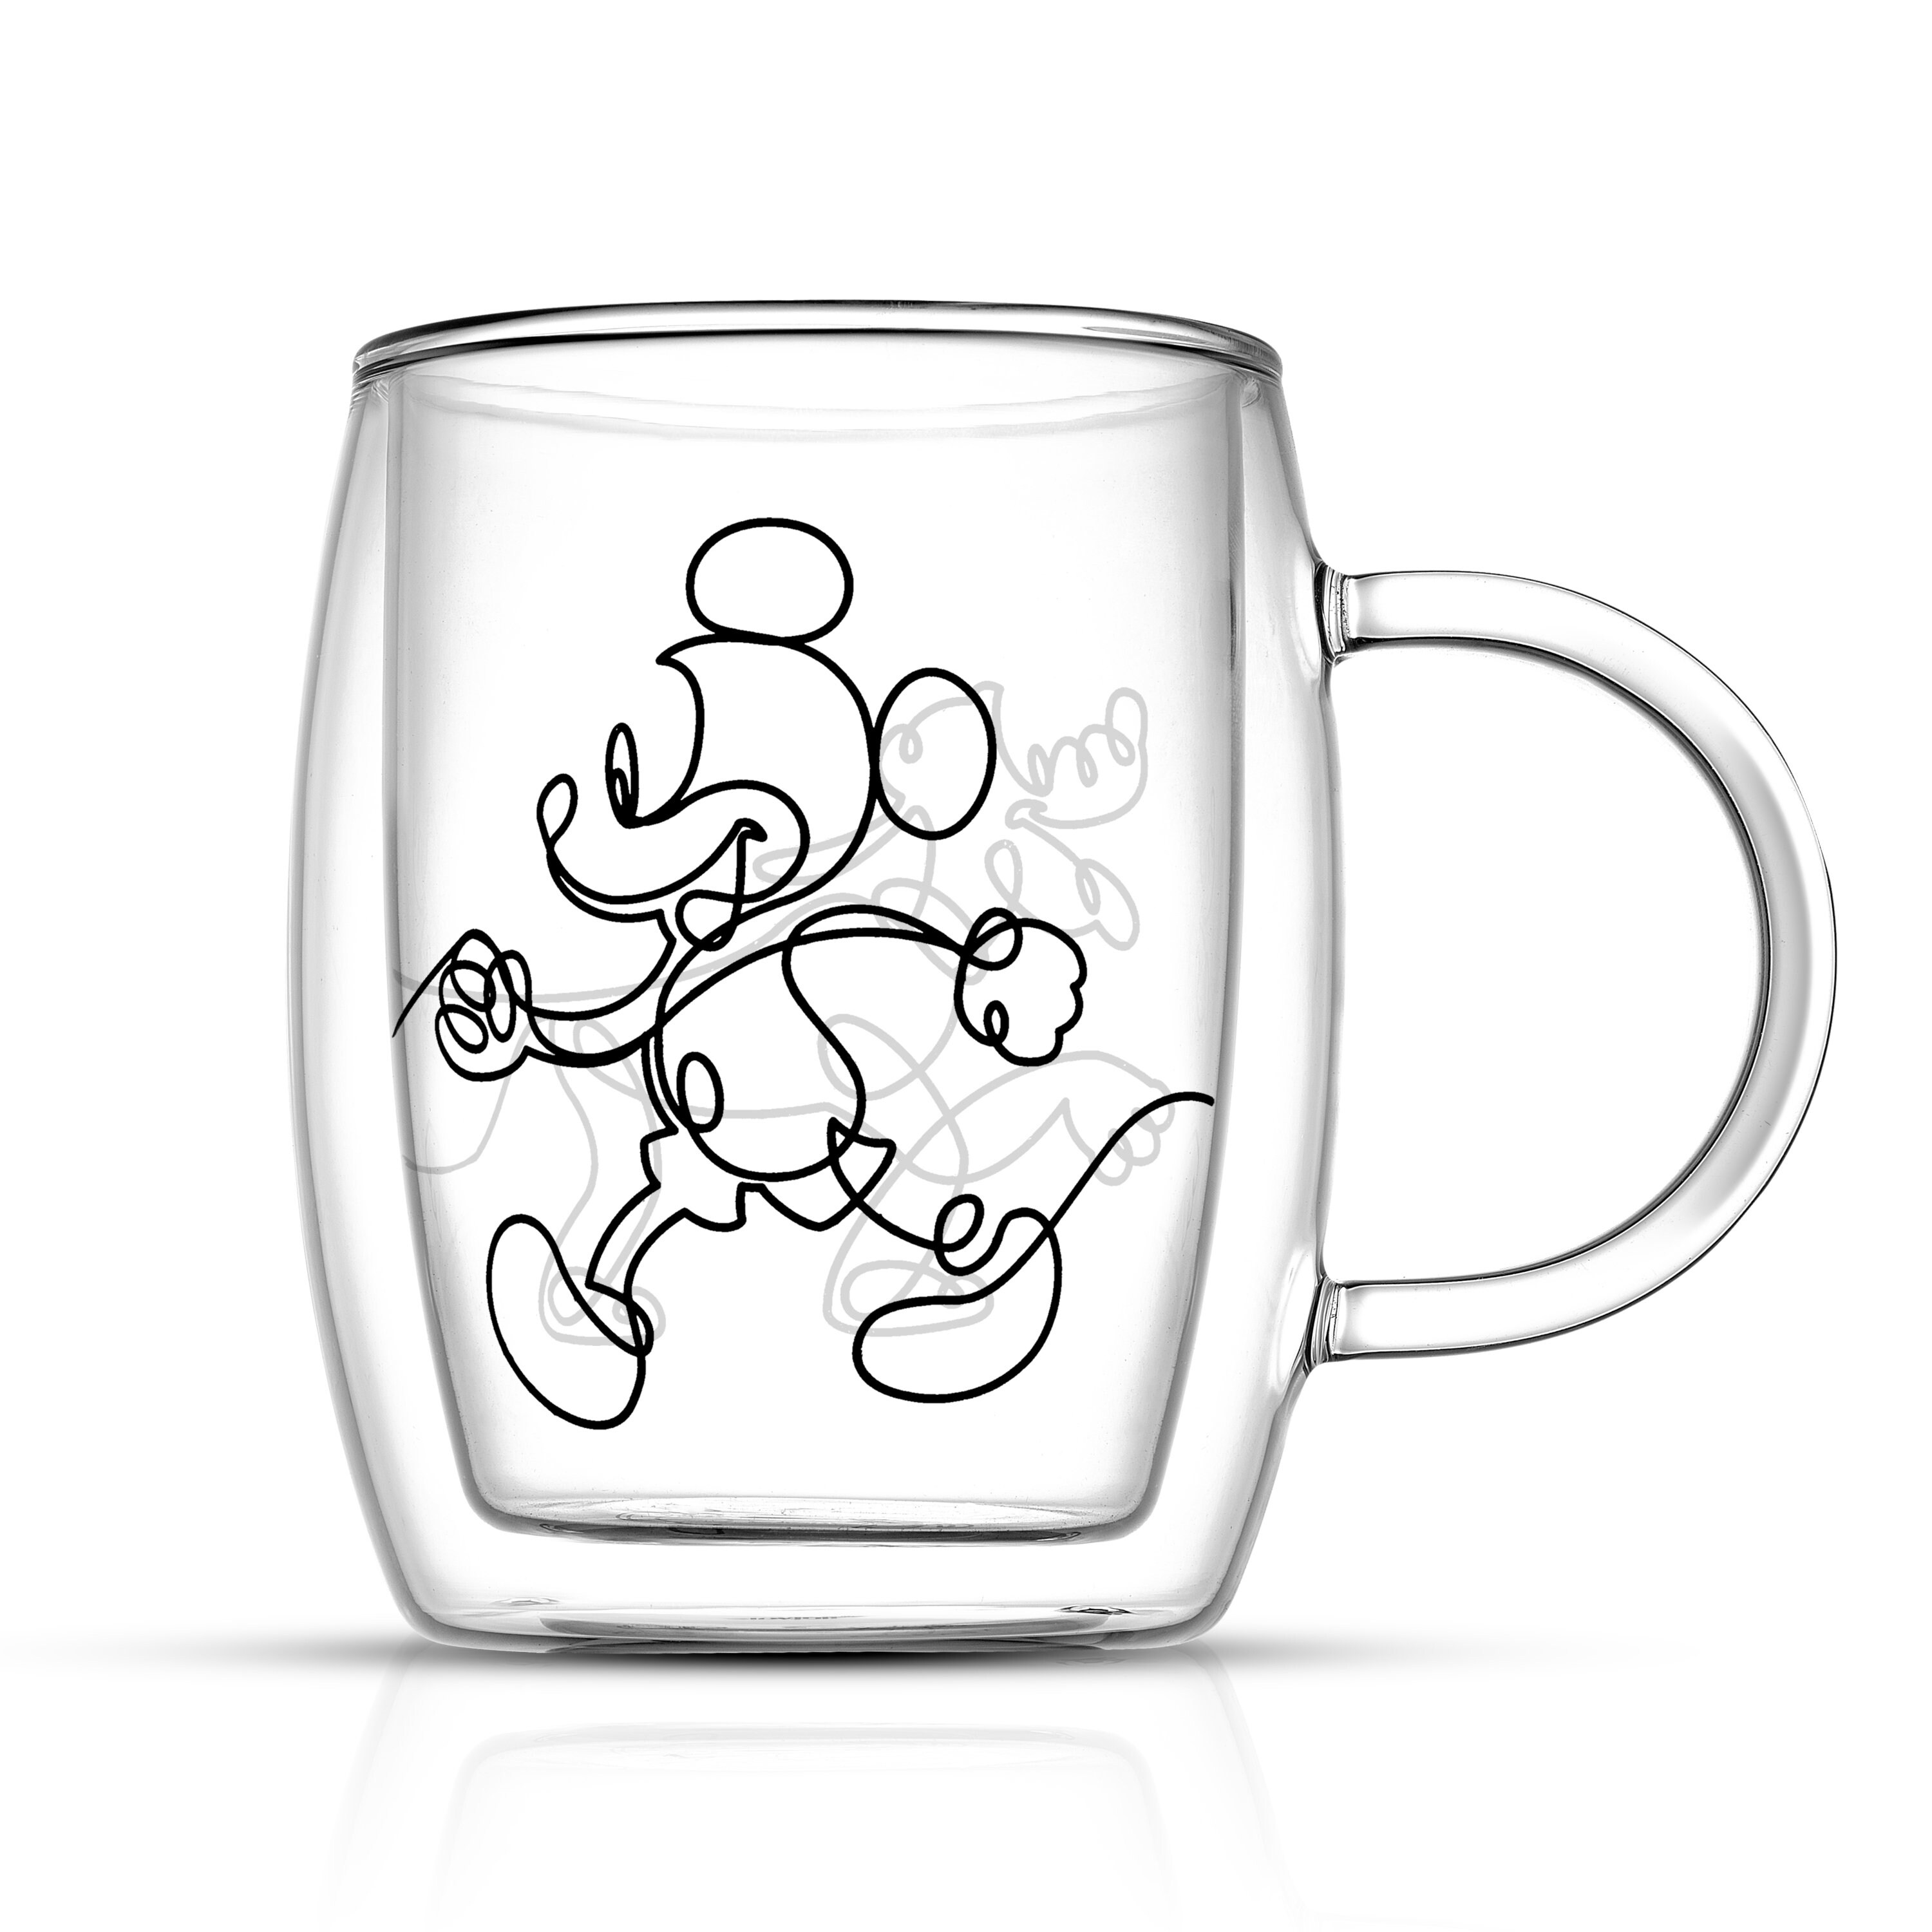 https://ak1.ostkcdn.com/images/products/is/images/direct/83cacb718fcc900a643cd864349bf9bd36d61ffb/JoyJolt-Disney-Mickey-and-Pluto-Glass-Mugs---Set-of-2-Double-Wall-Tea-Glass-Espresso-Coffee-Cups---5.4-oz.jpg